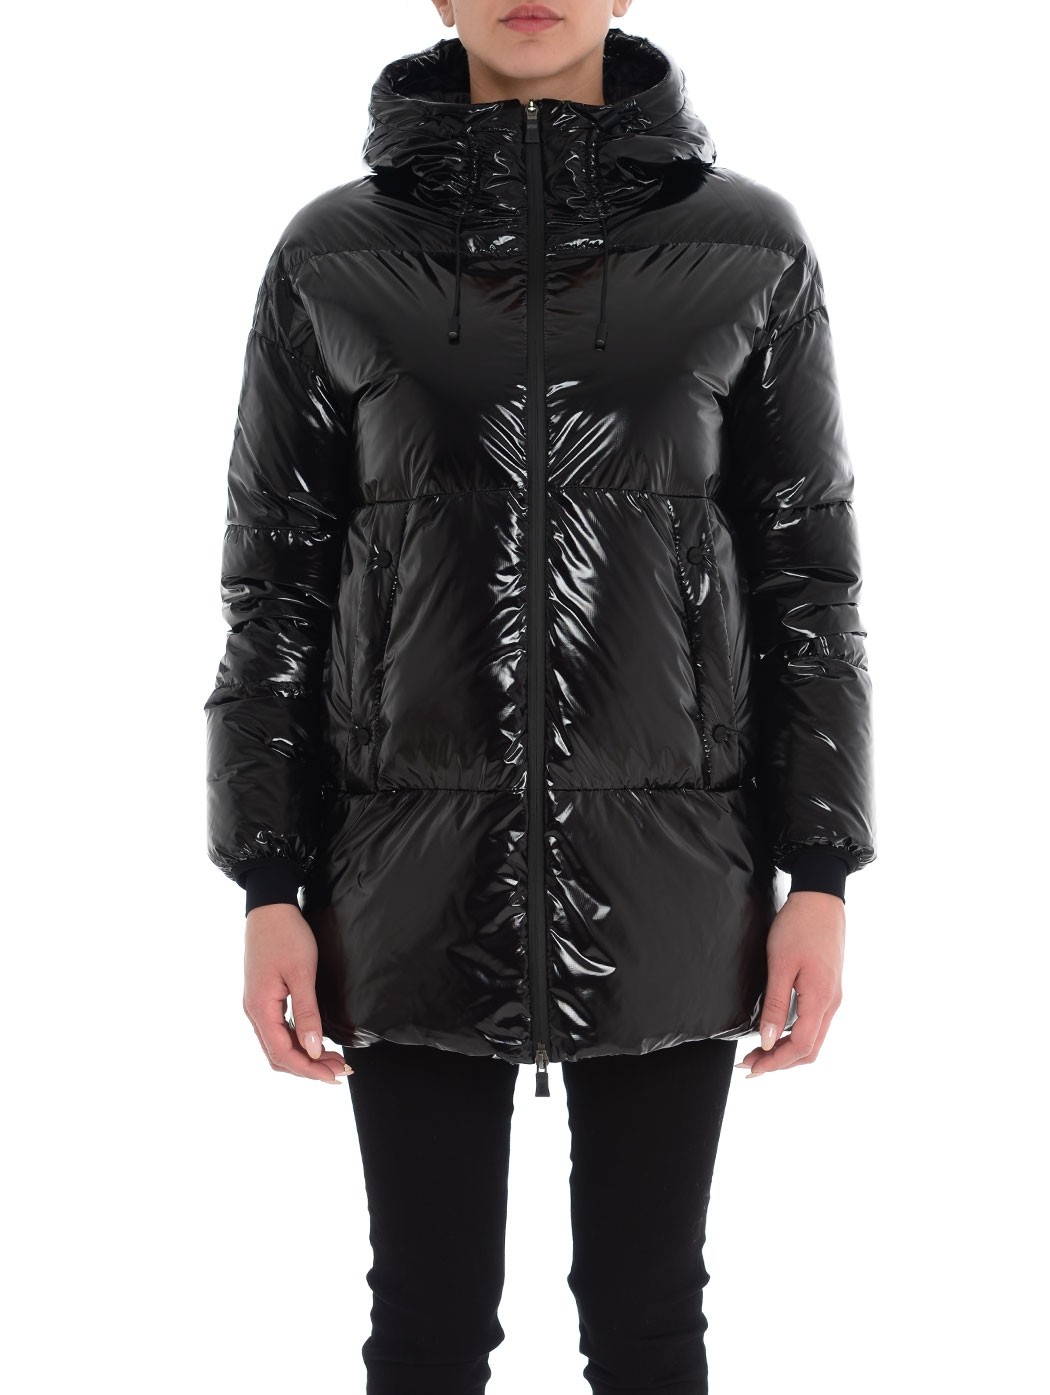  down jackets,removable hoods,WOMEN DOWN JACKETS,MONCLER PADDED JACKETS,WOOLRICH ARCTIC PARKA,HERNO DOWN JACKETS  HERNO PI00232DL-12345